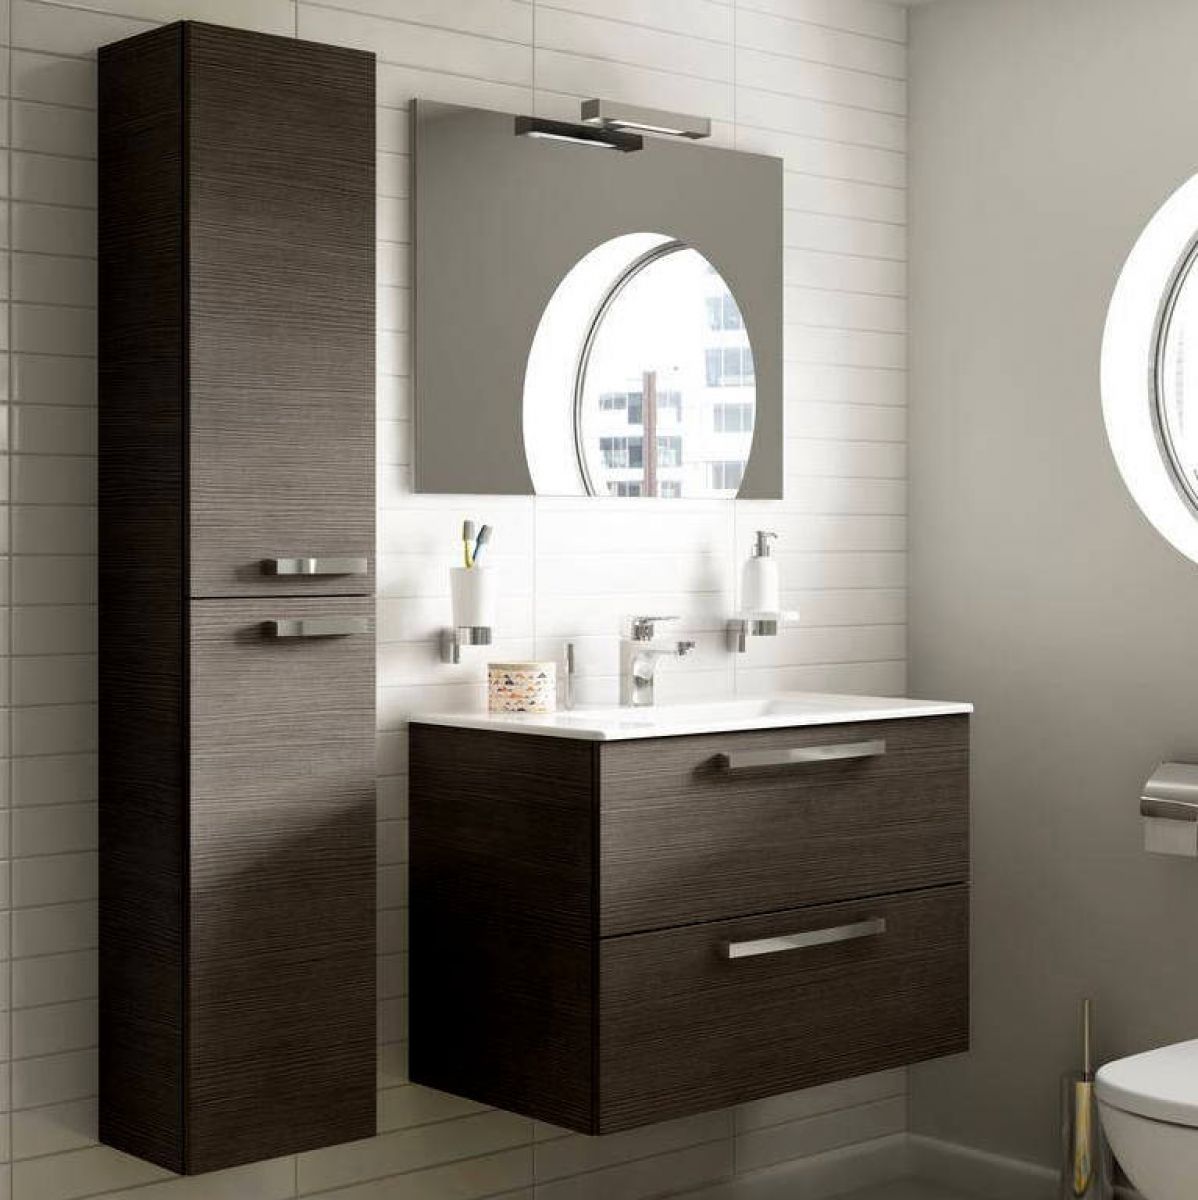 image example of wall hung bathroom furniture